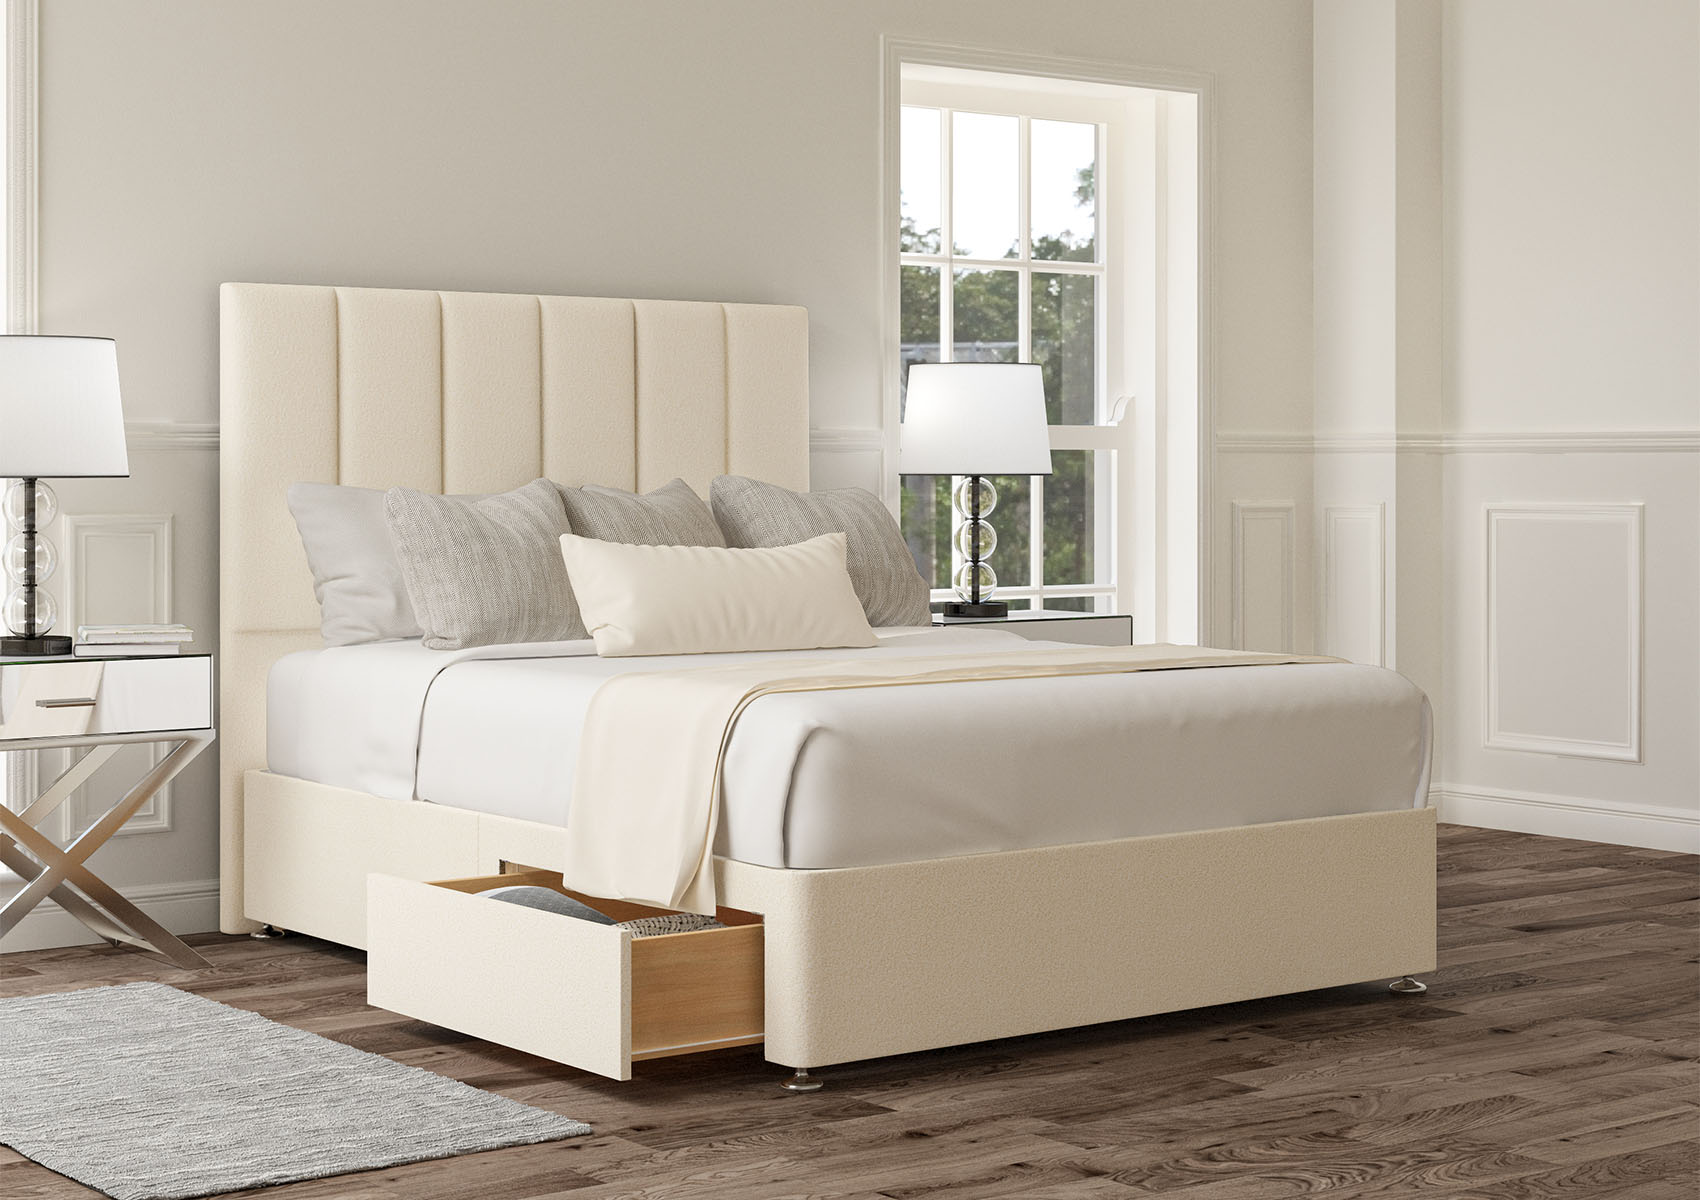 View Empire Arlington Ice Upholstered King Size Divan Bed Time4Sleep information